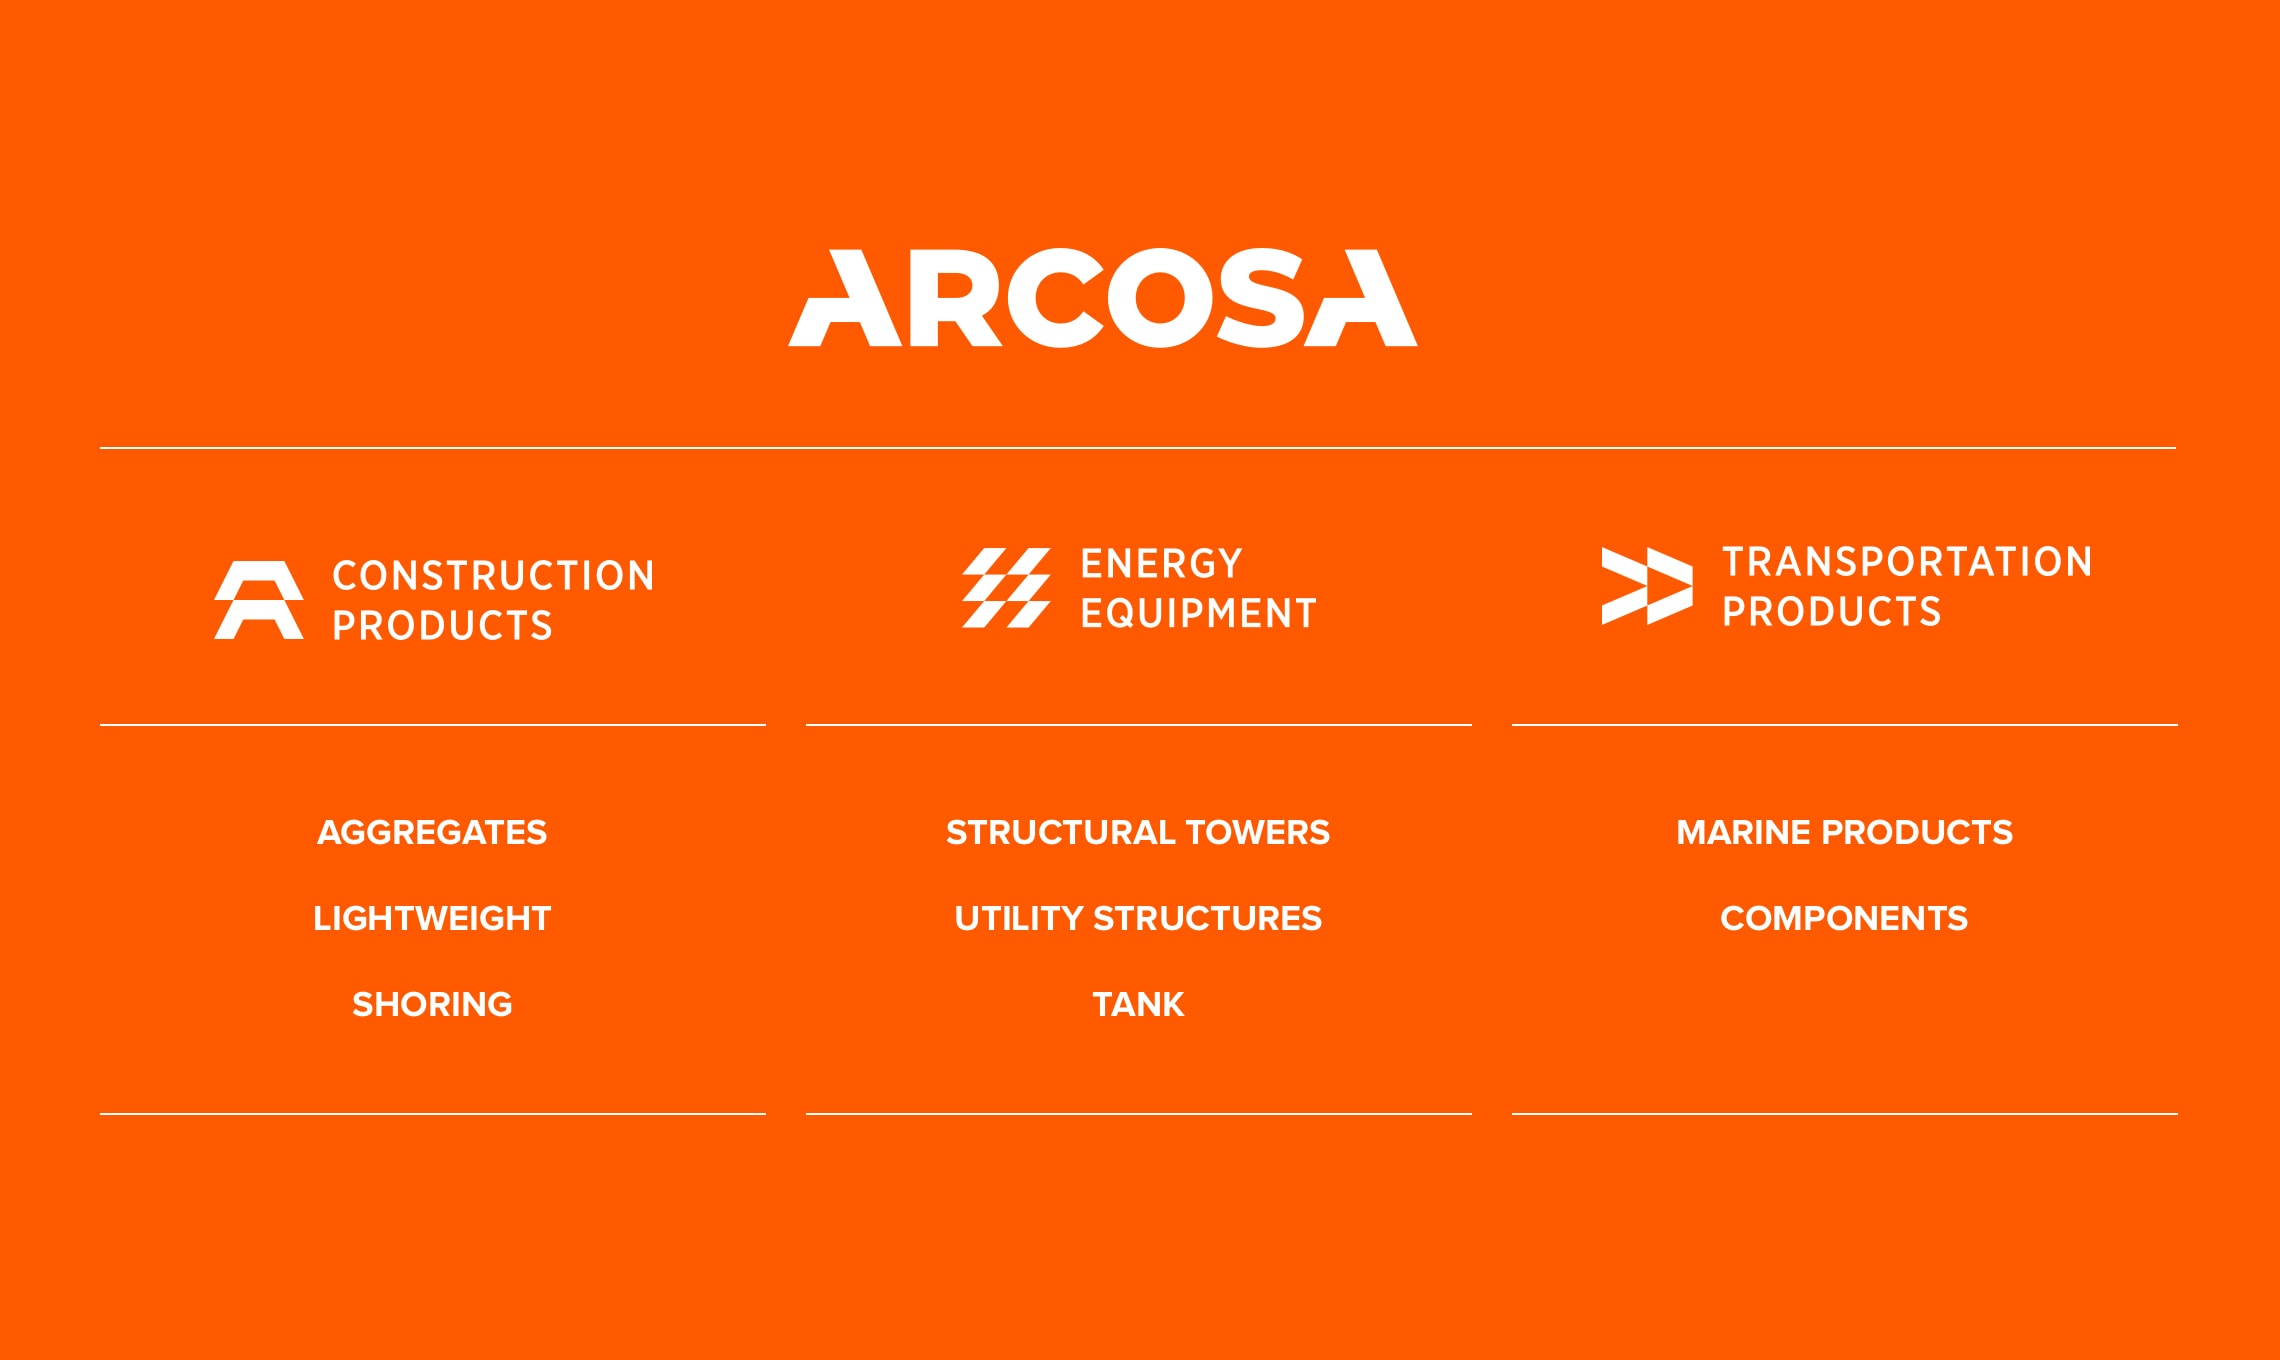 Arcosa - brand architecture for construction products and services.